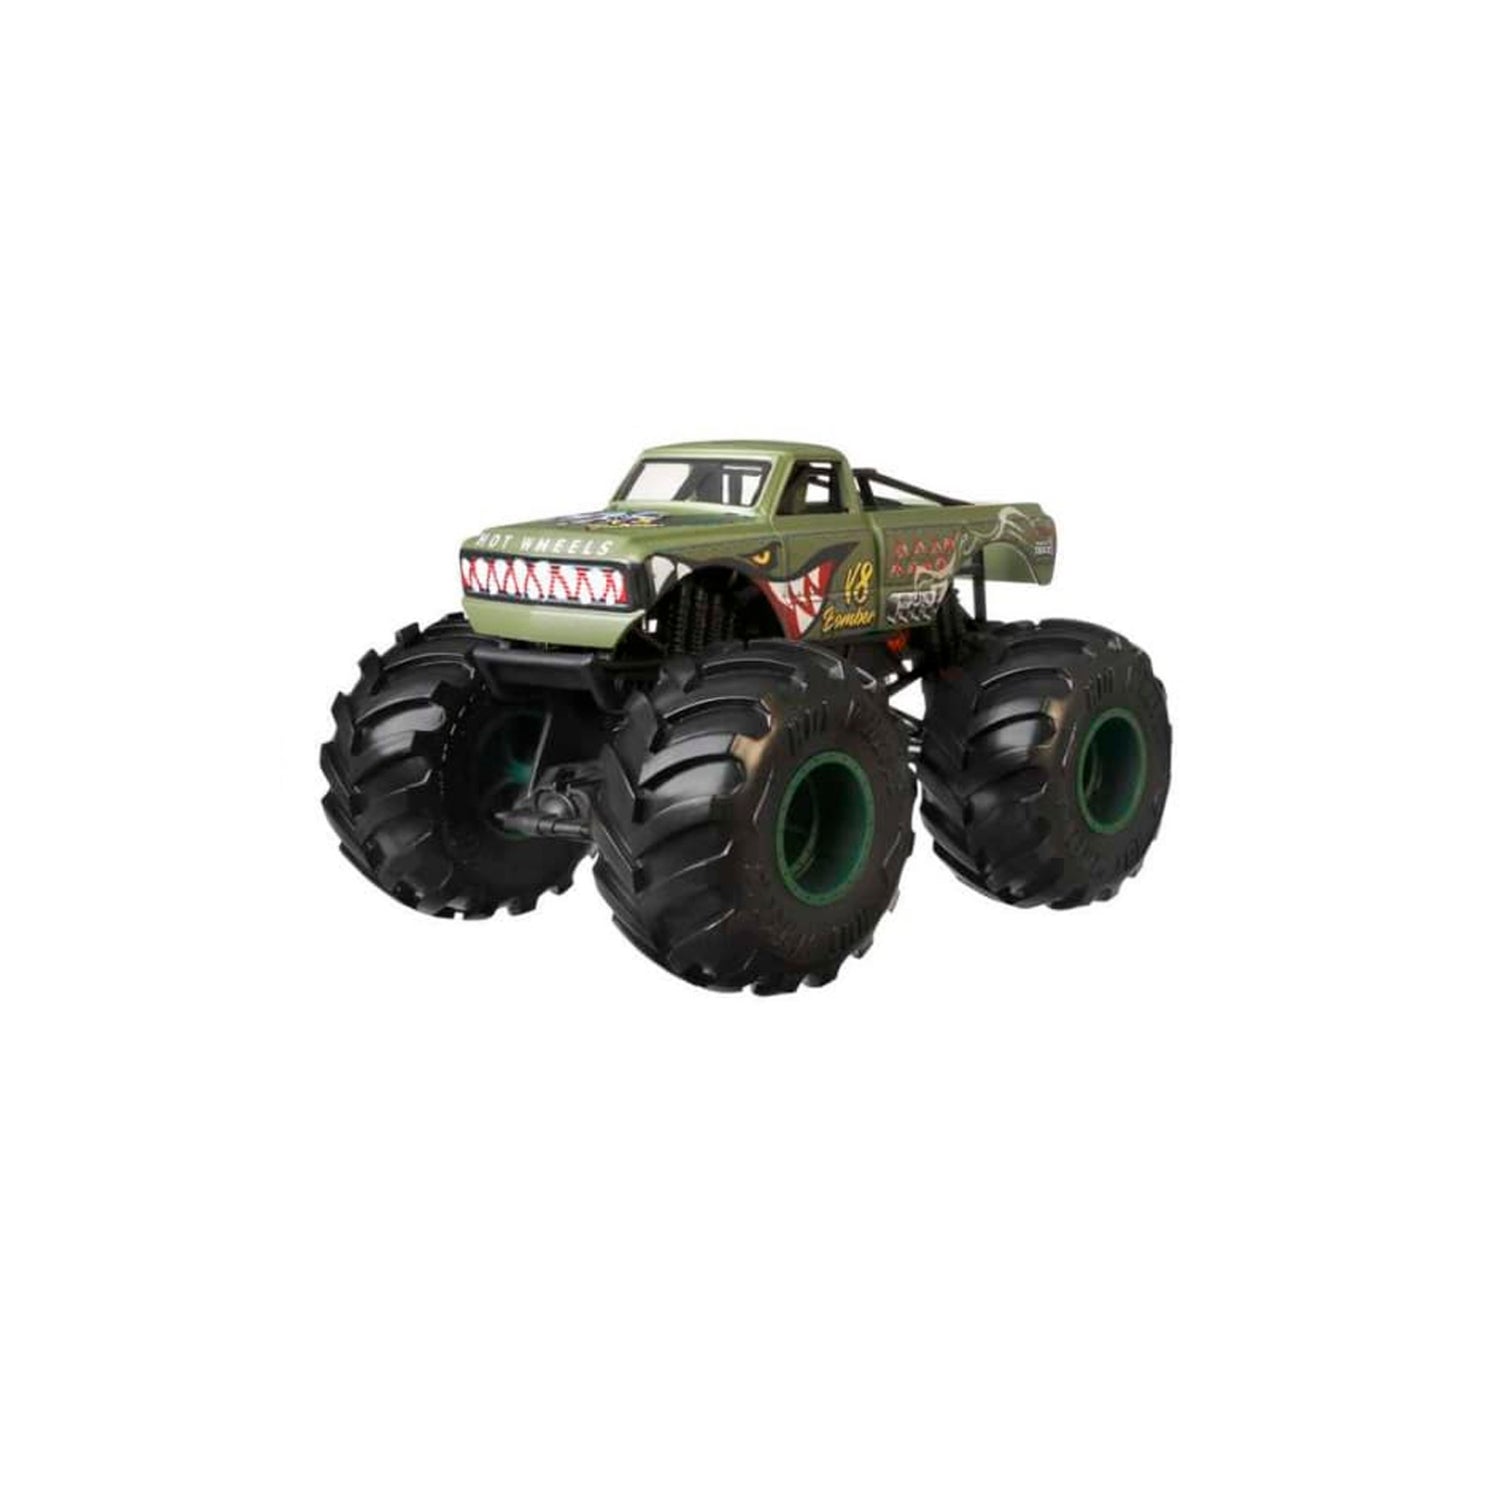 Monster Trucks Die-Cast Truck 2 Pack - Assorted by Hot Wheels at